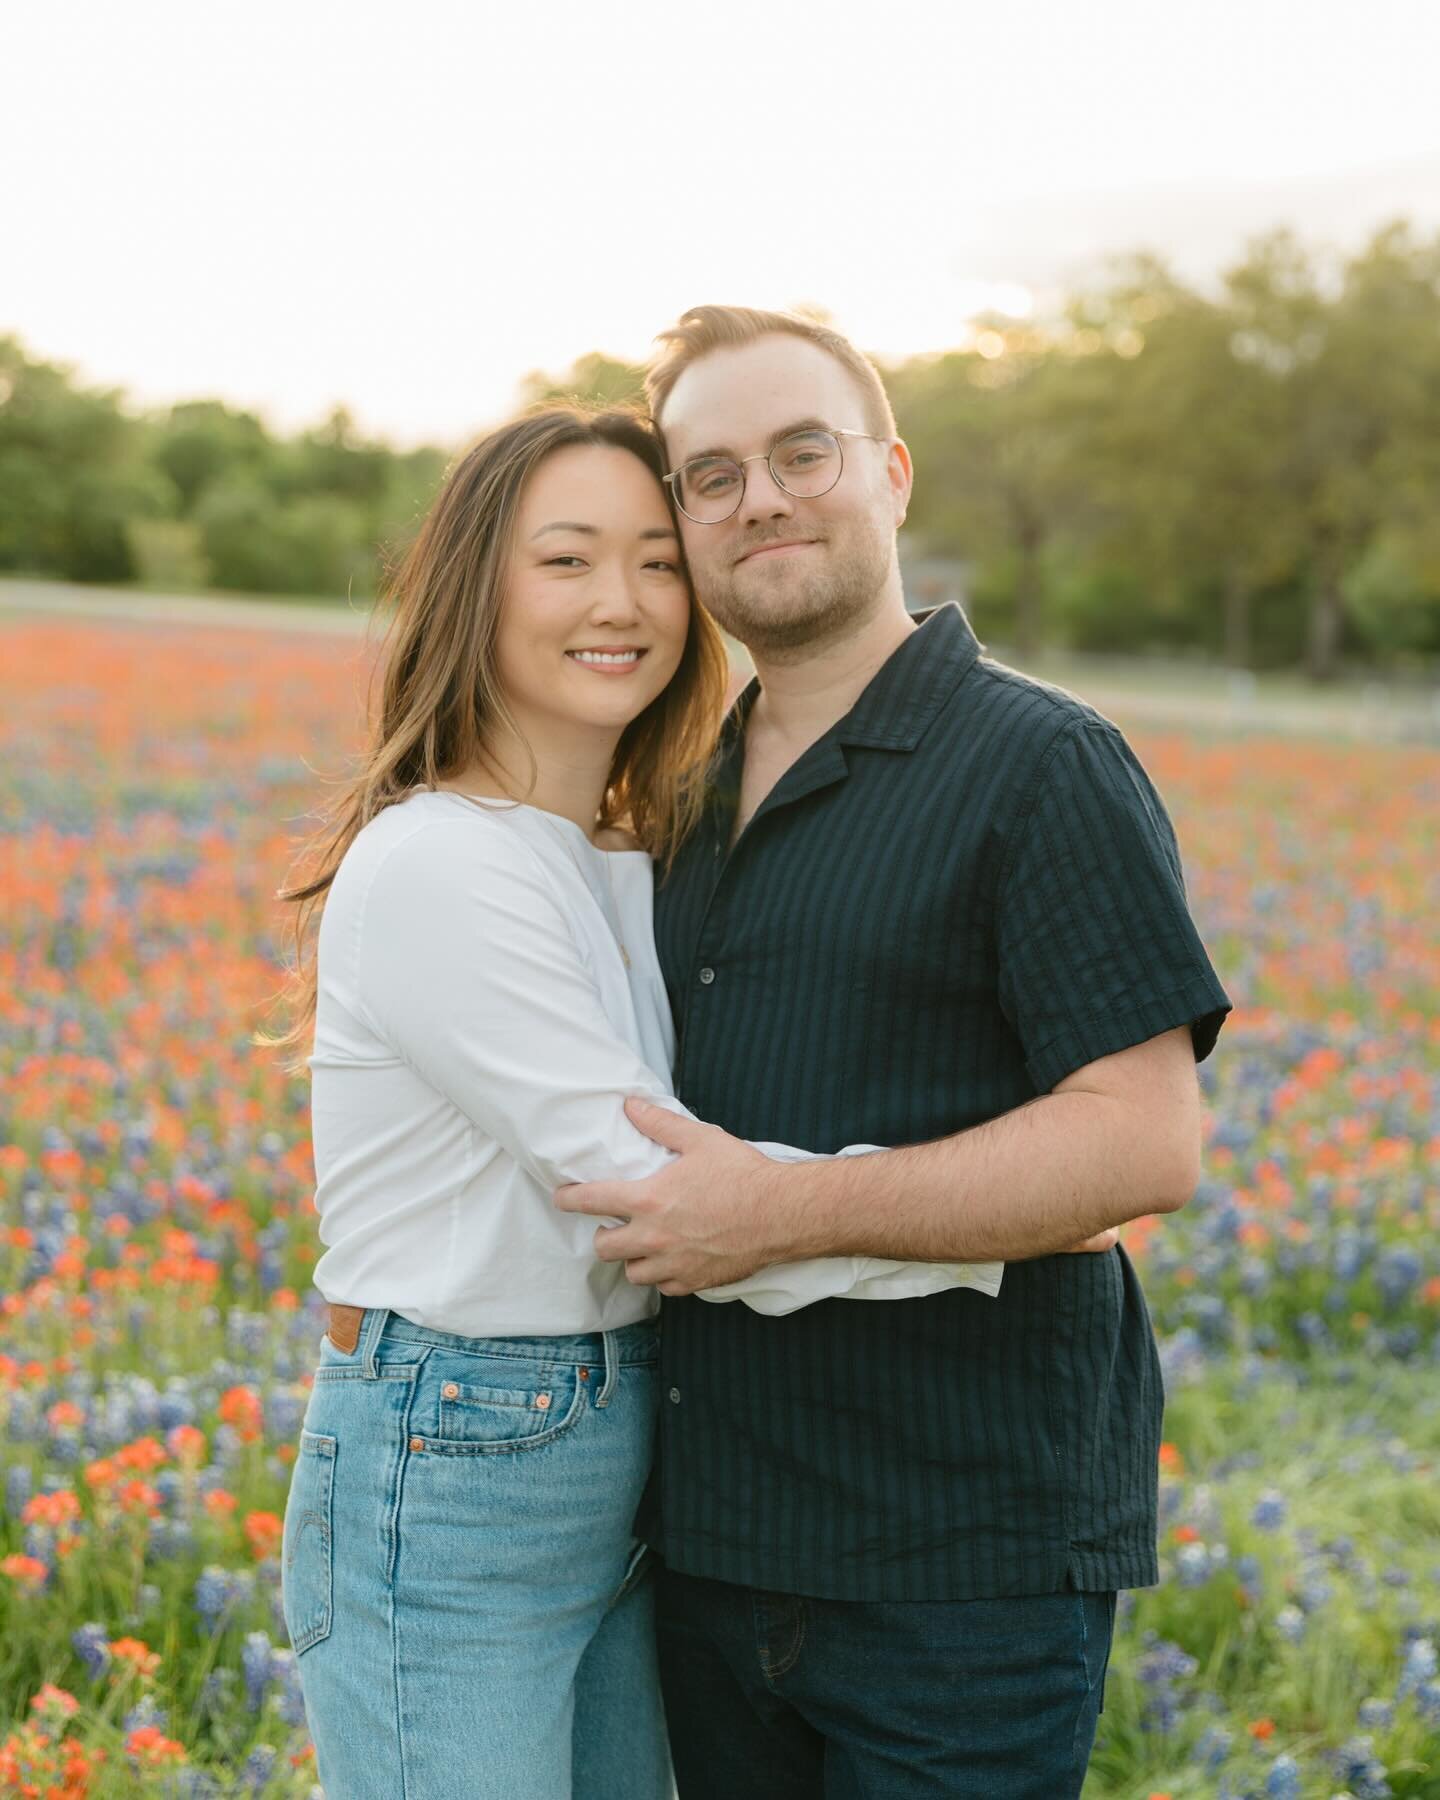 Spring has SPRUNG! 💐🥹 Went out to McKinney Falls with Stacy and Patrick this weekend for their engagements and was welcomed with the most gorgeous field of flowers! 🤍
.
.
.
.
.
.
.
.
.
.
.
.
.

#sanantoniowedding #satxweddings #texaswedding #austi